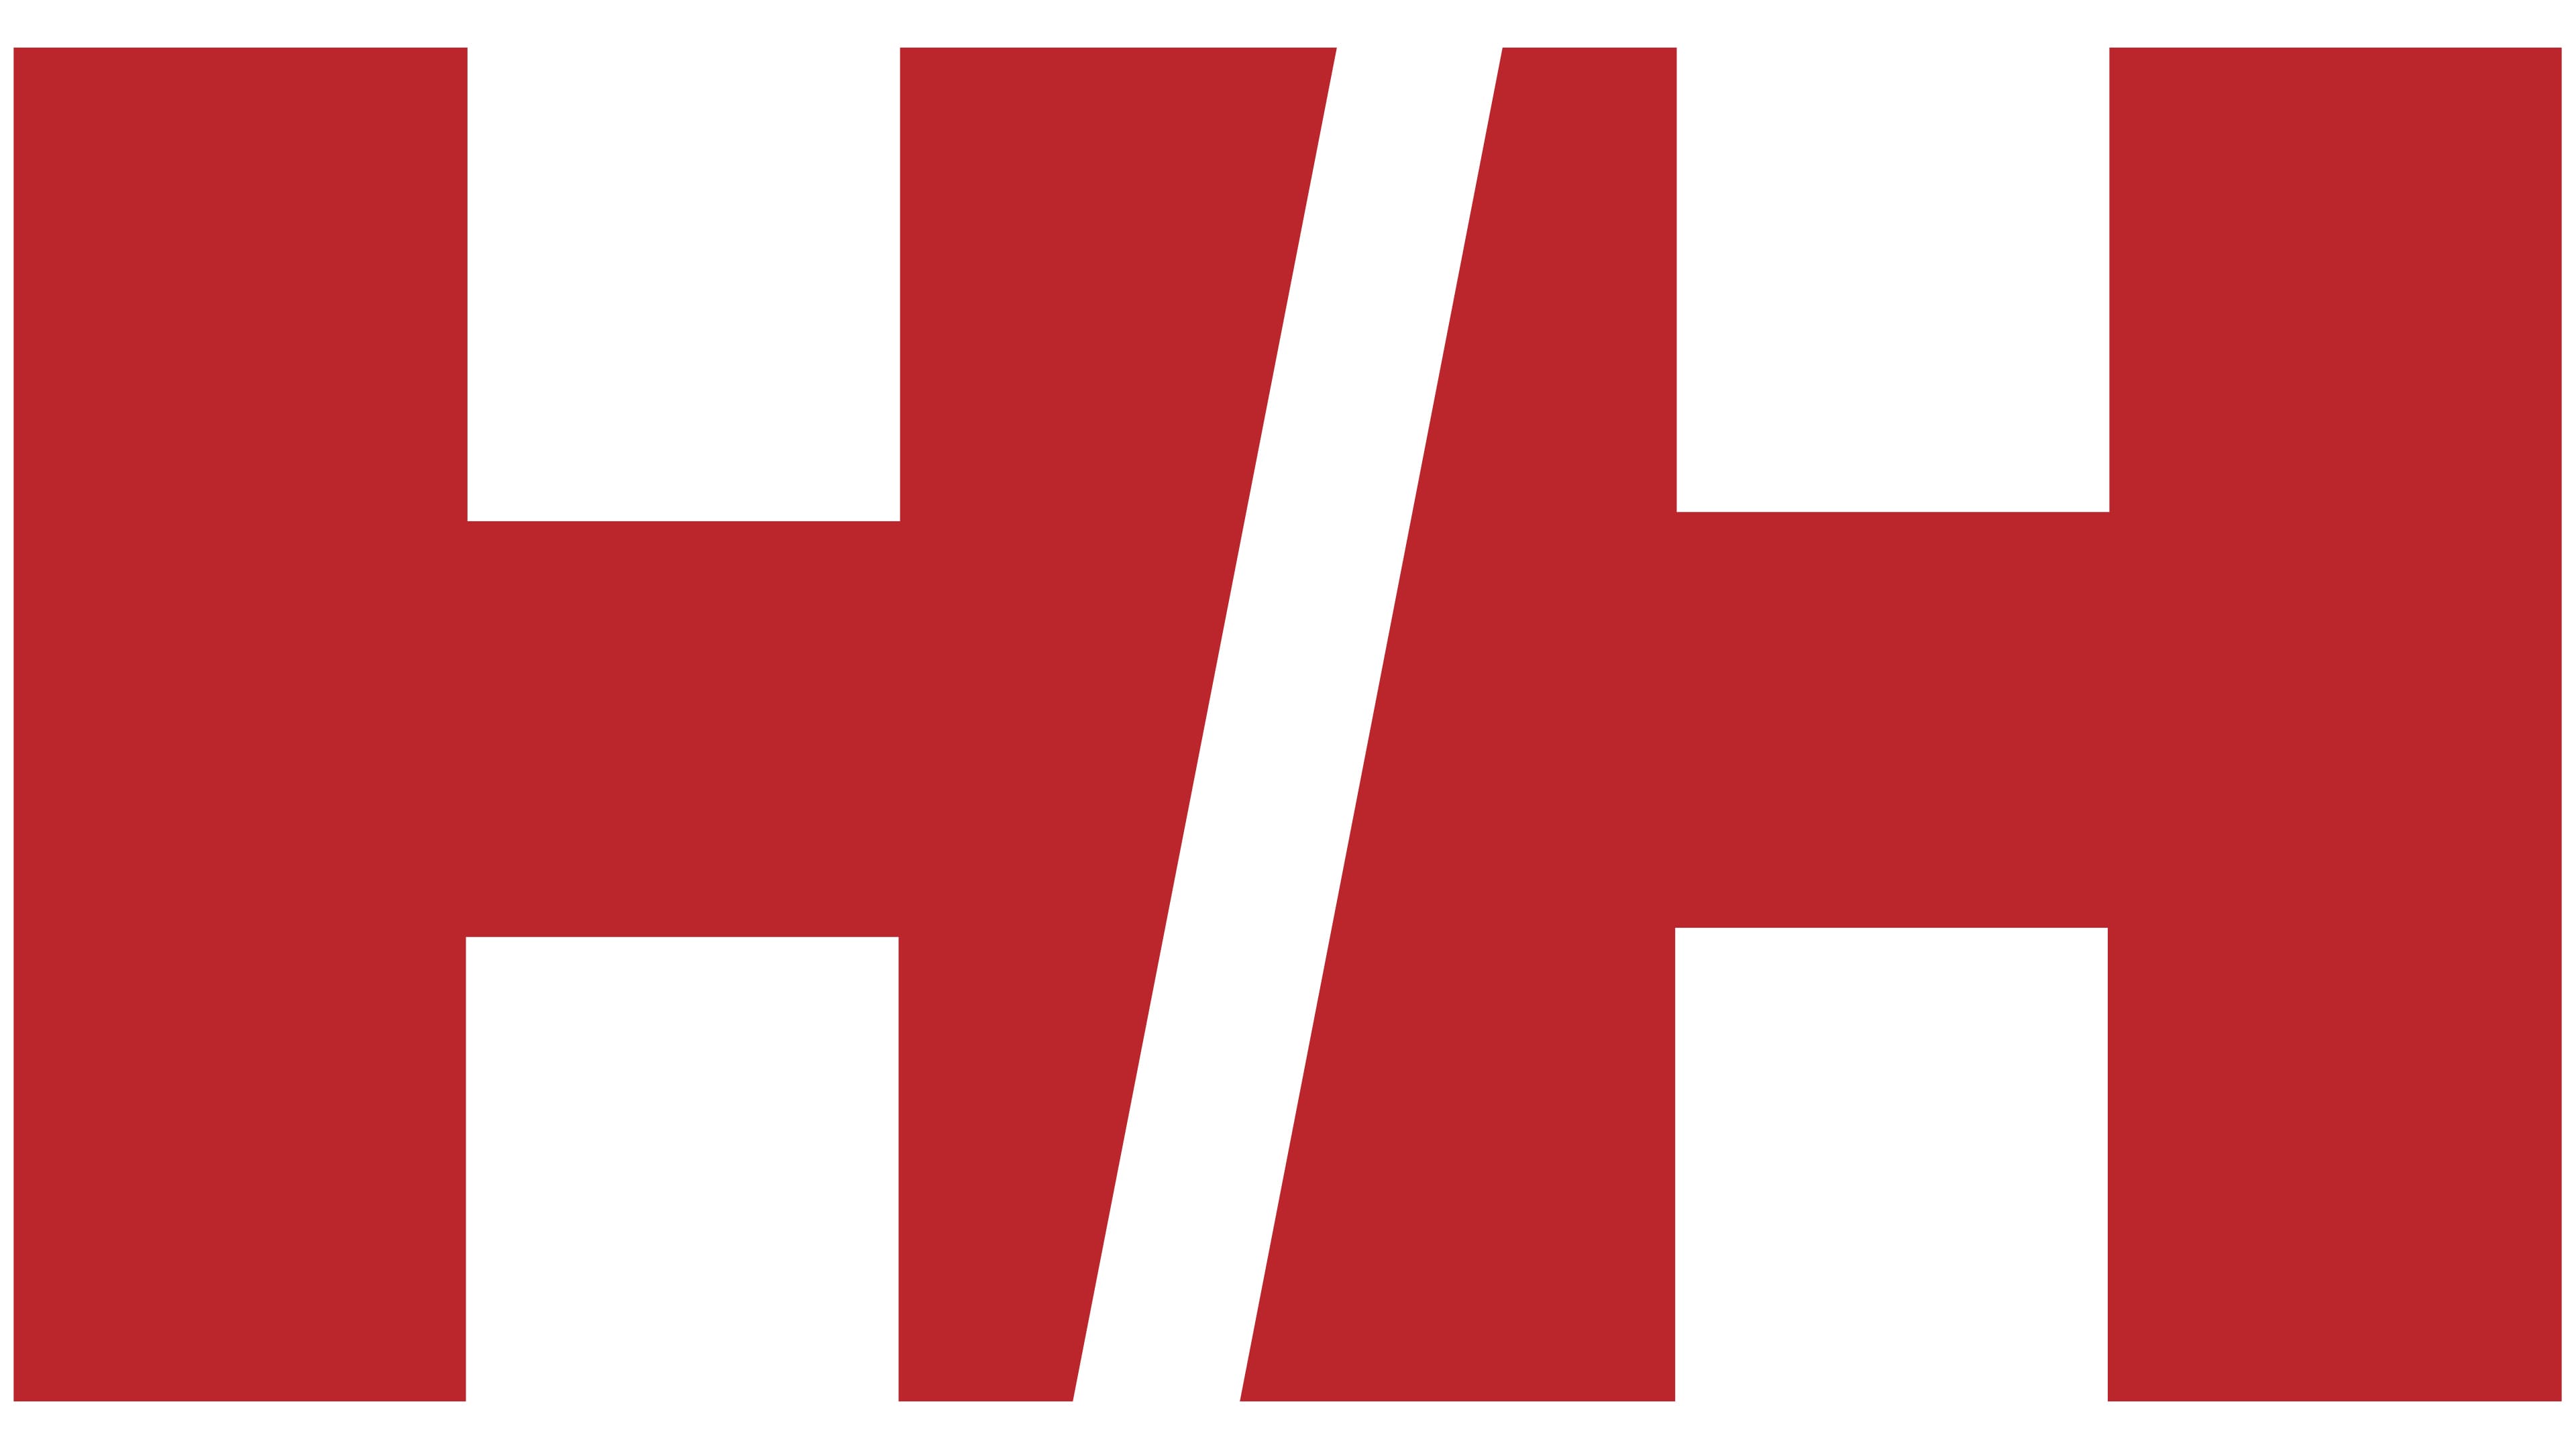 fluweel whisky catalogus Helly Hansen Logo, symbol, meaning, history, PNG, brand